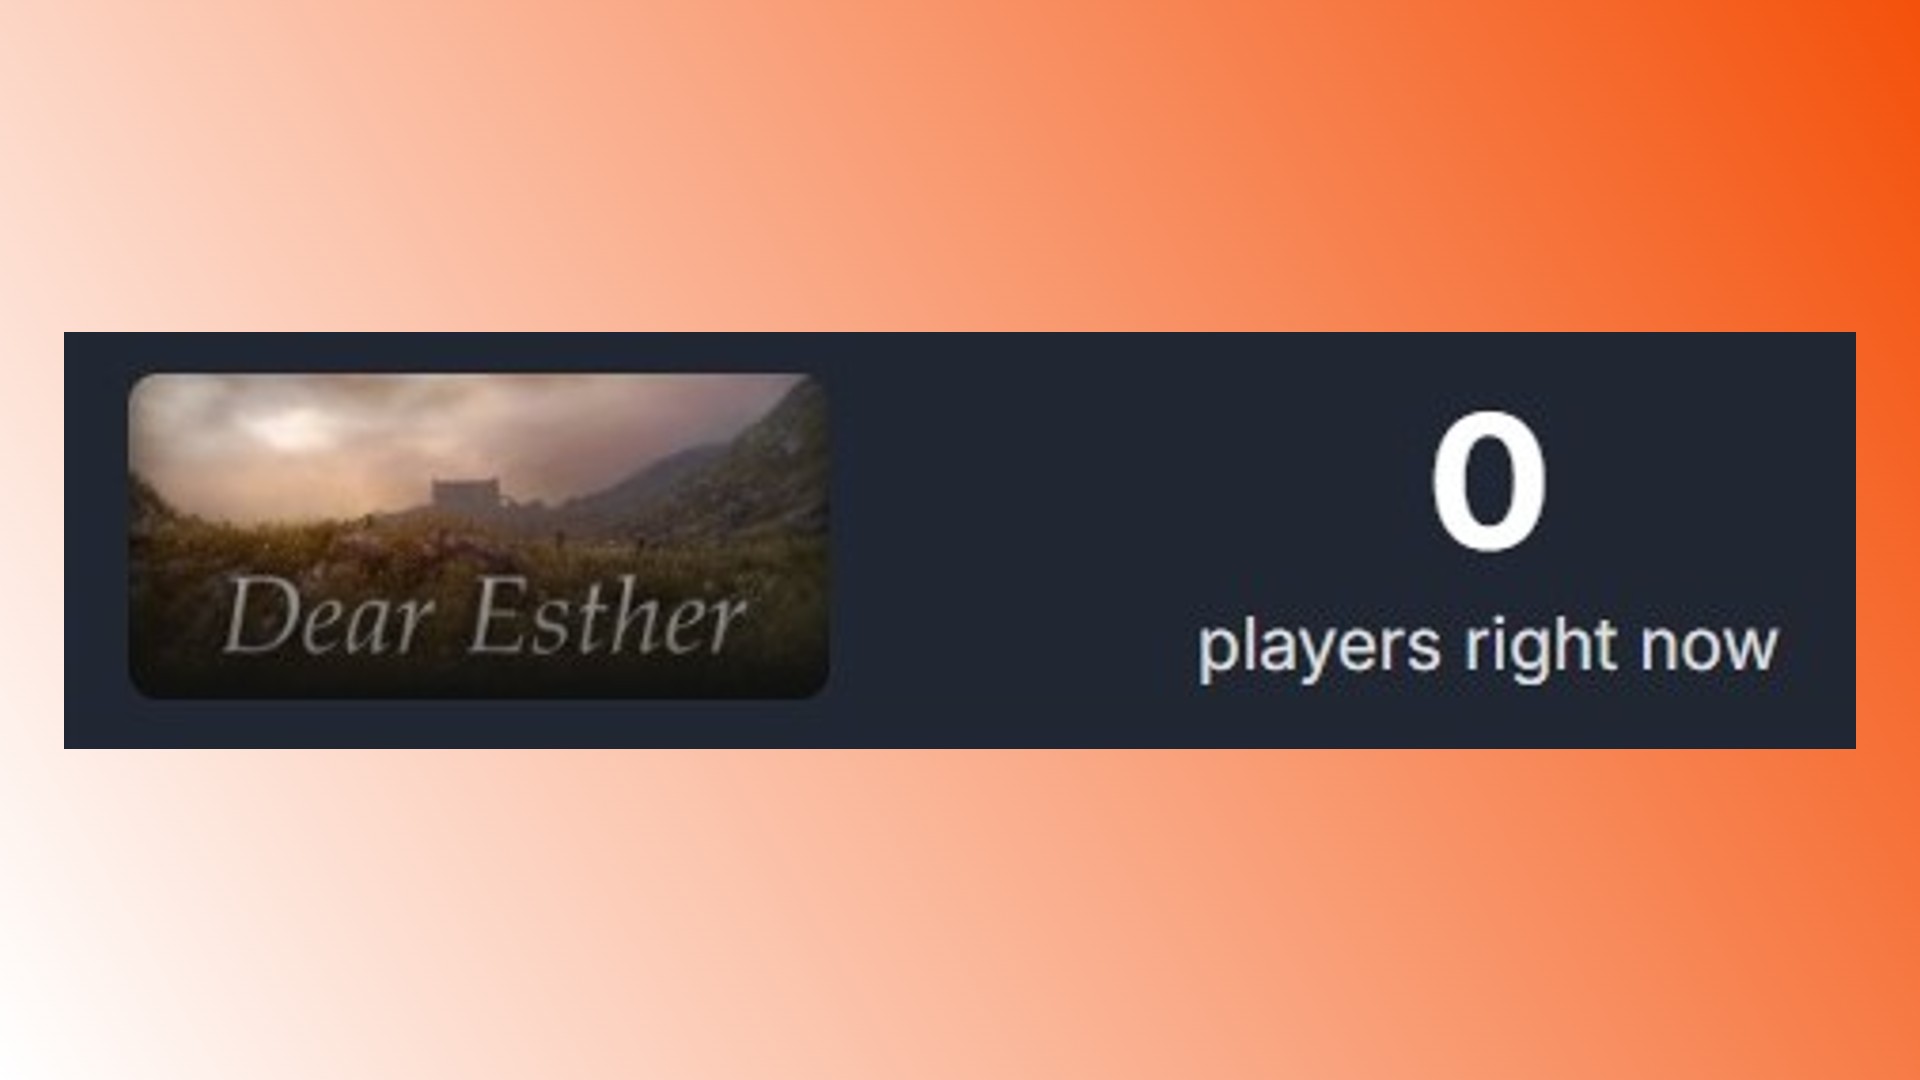 Steam games zero players: The Dear Esther Steam player count, for the indie game